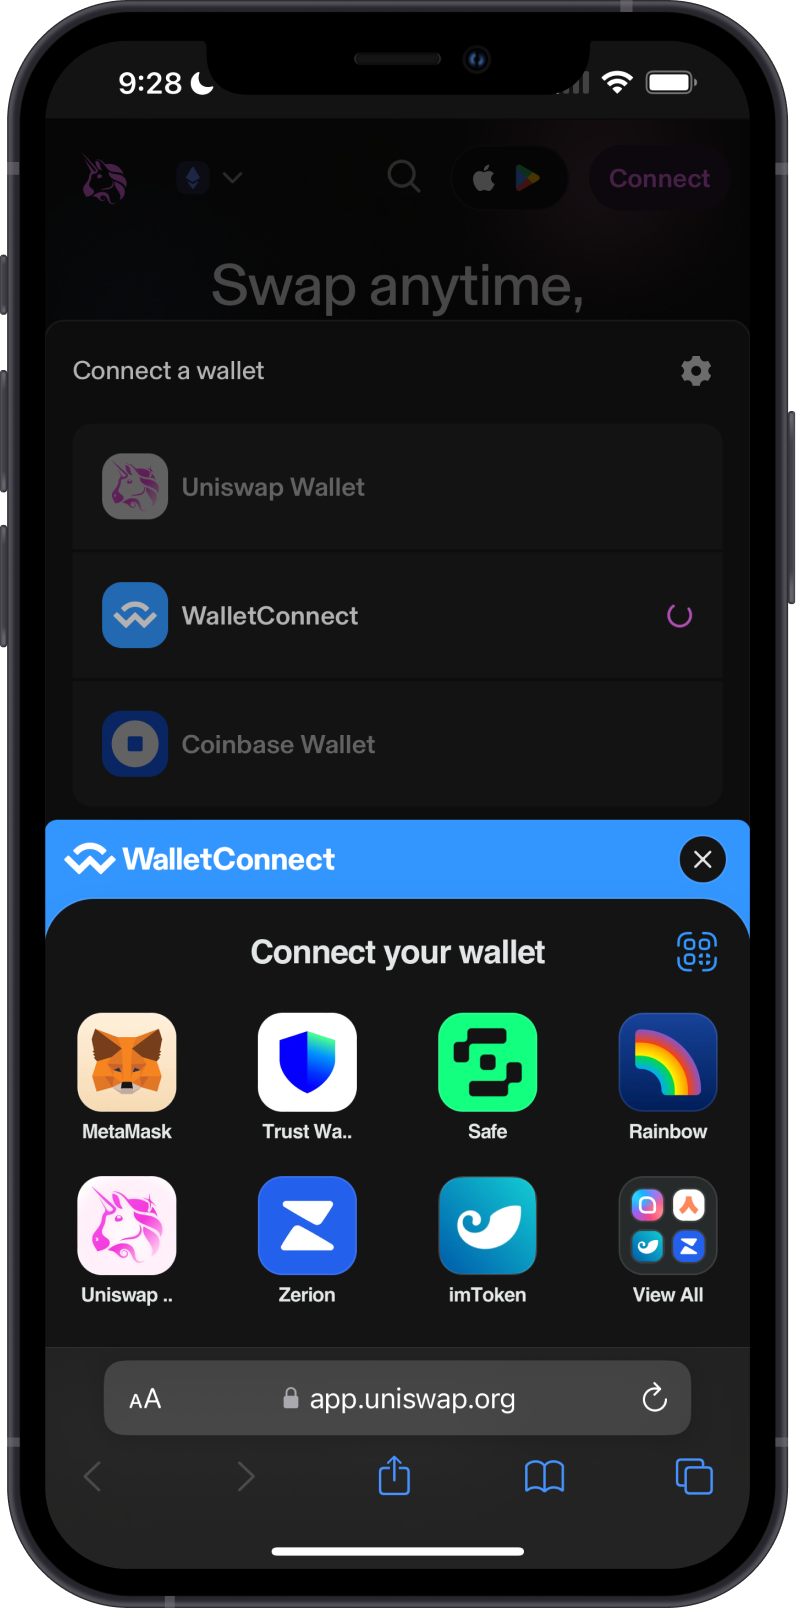 Connect a Wallet Screen